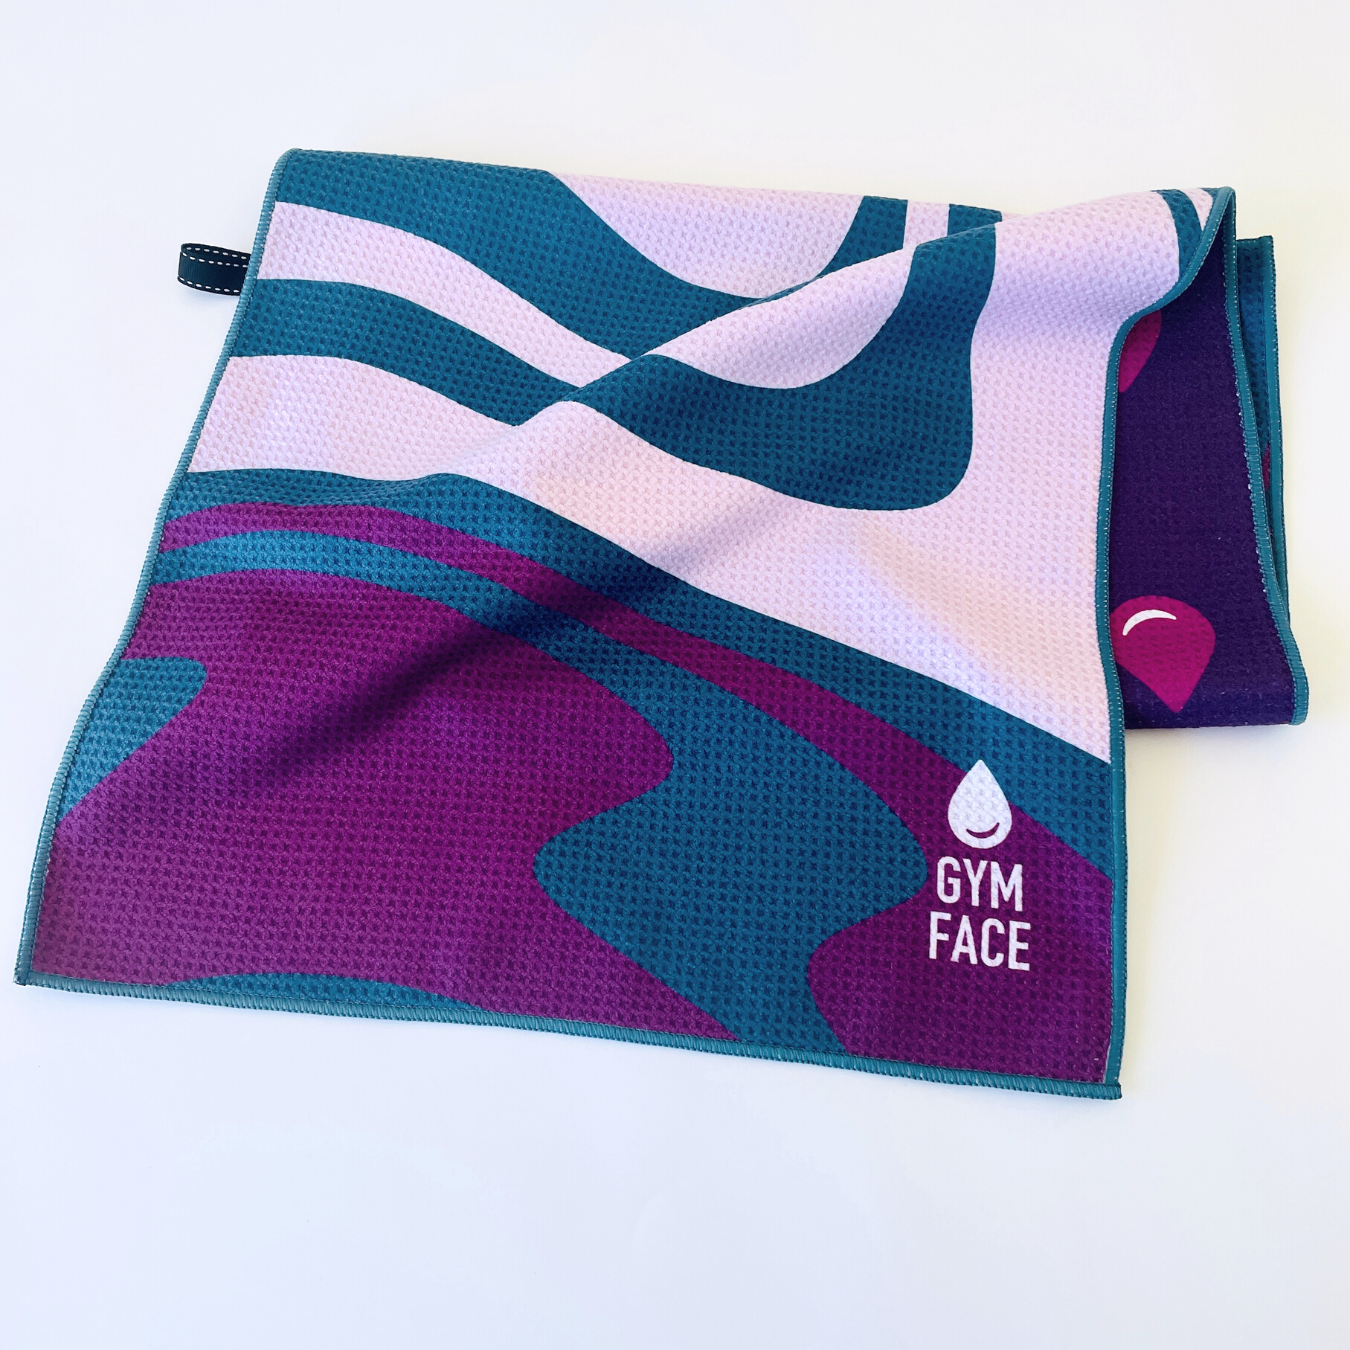 NEW DROP! Purple Marble | Gym Face™ Limited Drop 1.0 - Gym Face